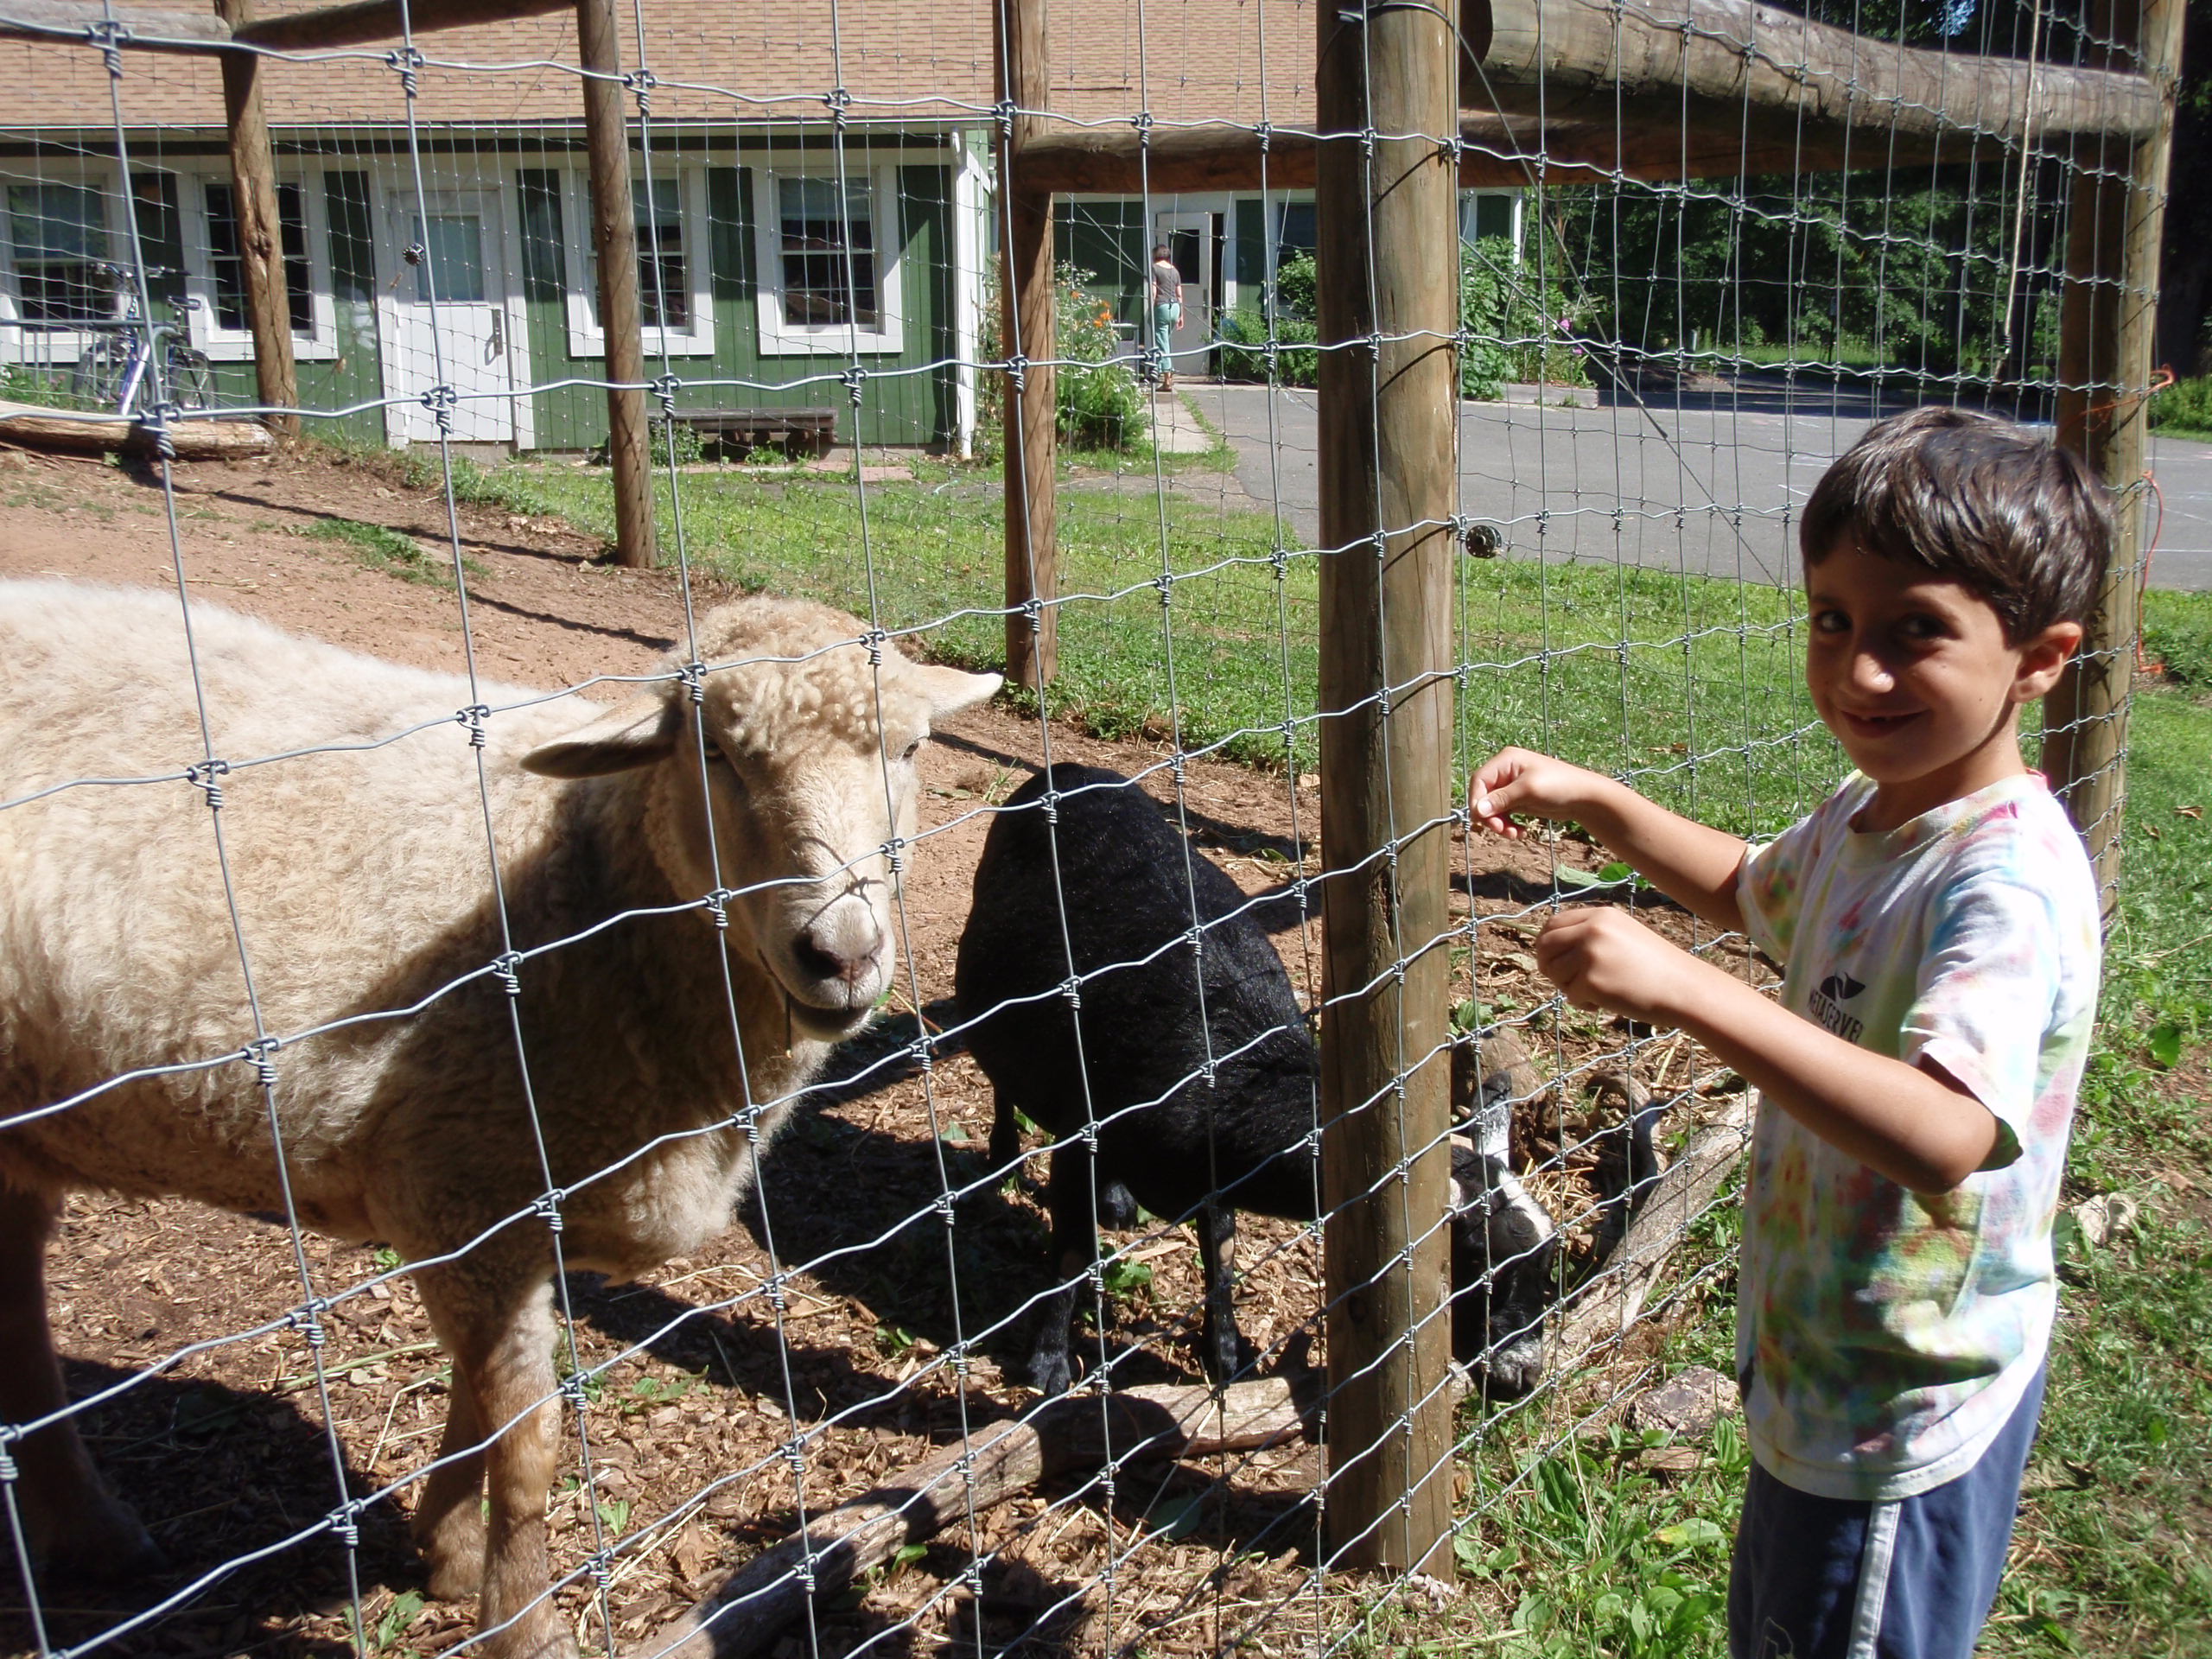 A boy feeds the sheep and goat in the animal yards at Common Ground.